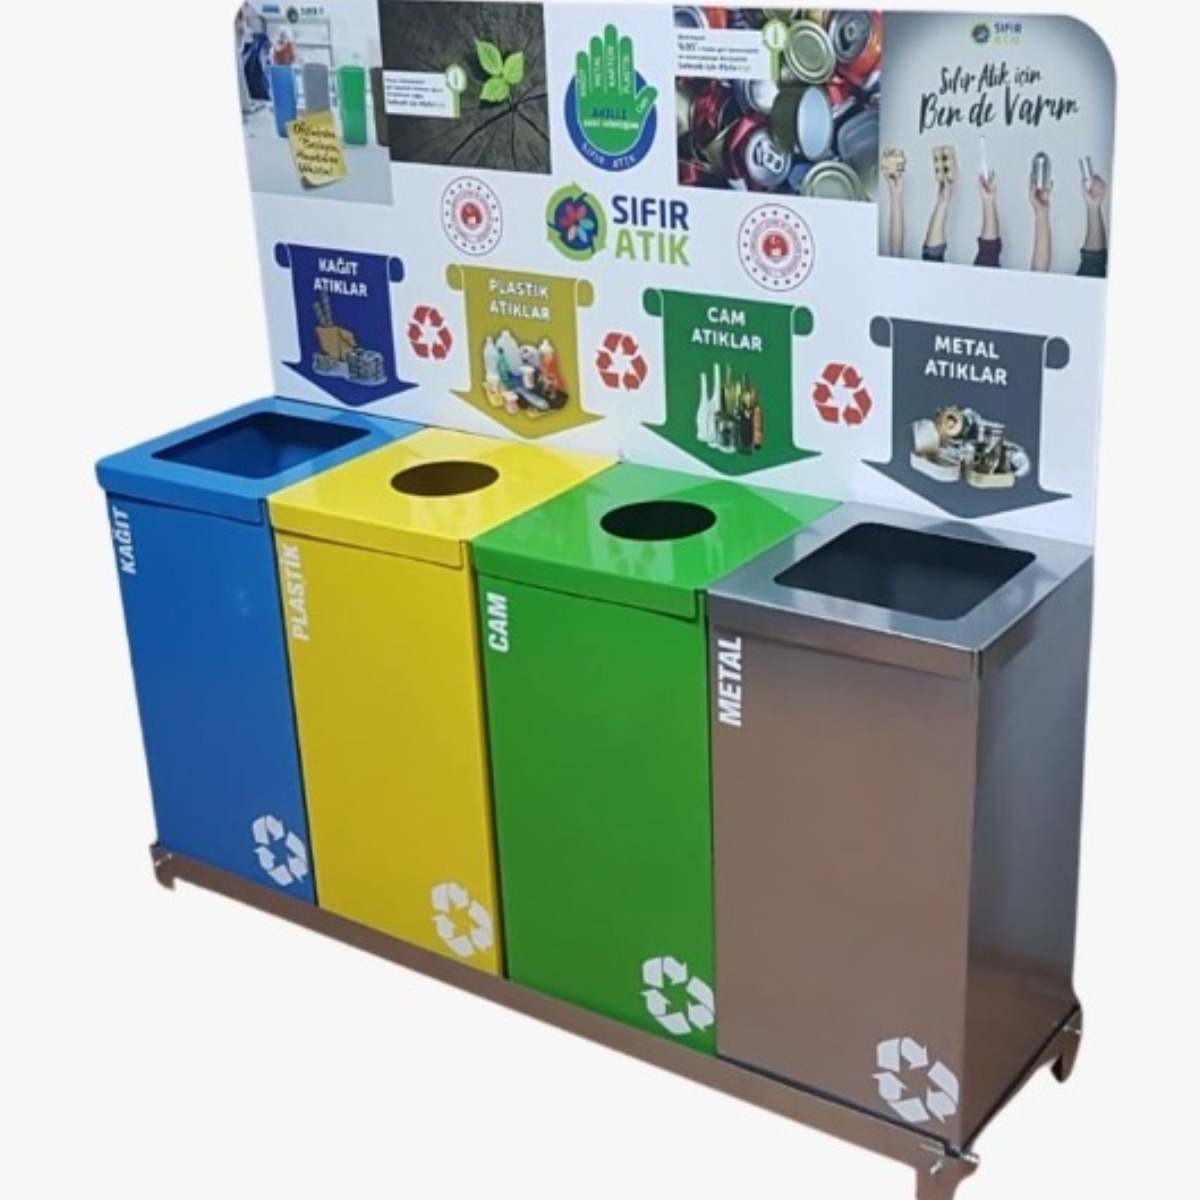 AB-799 4'Part Recycle Bin product logo